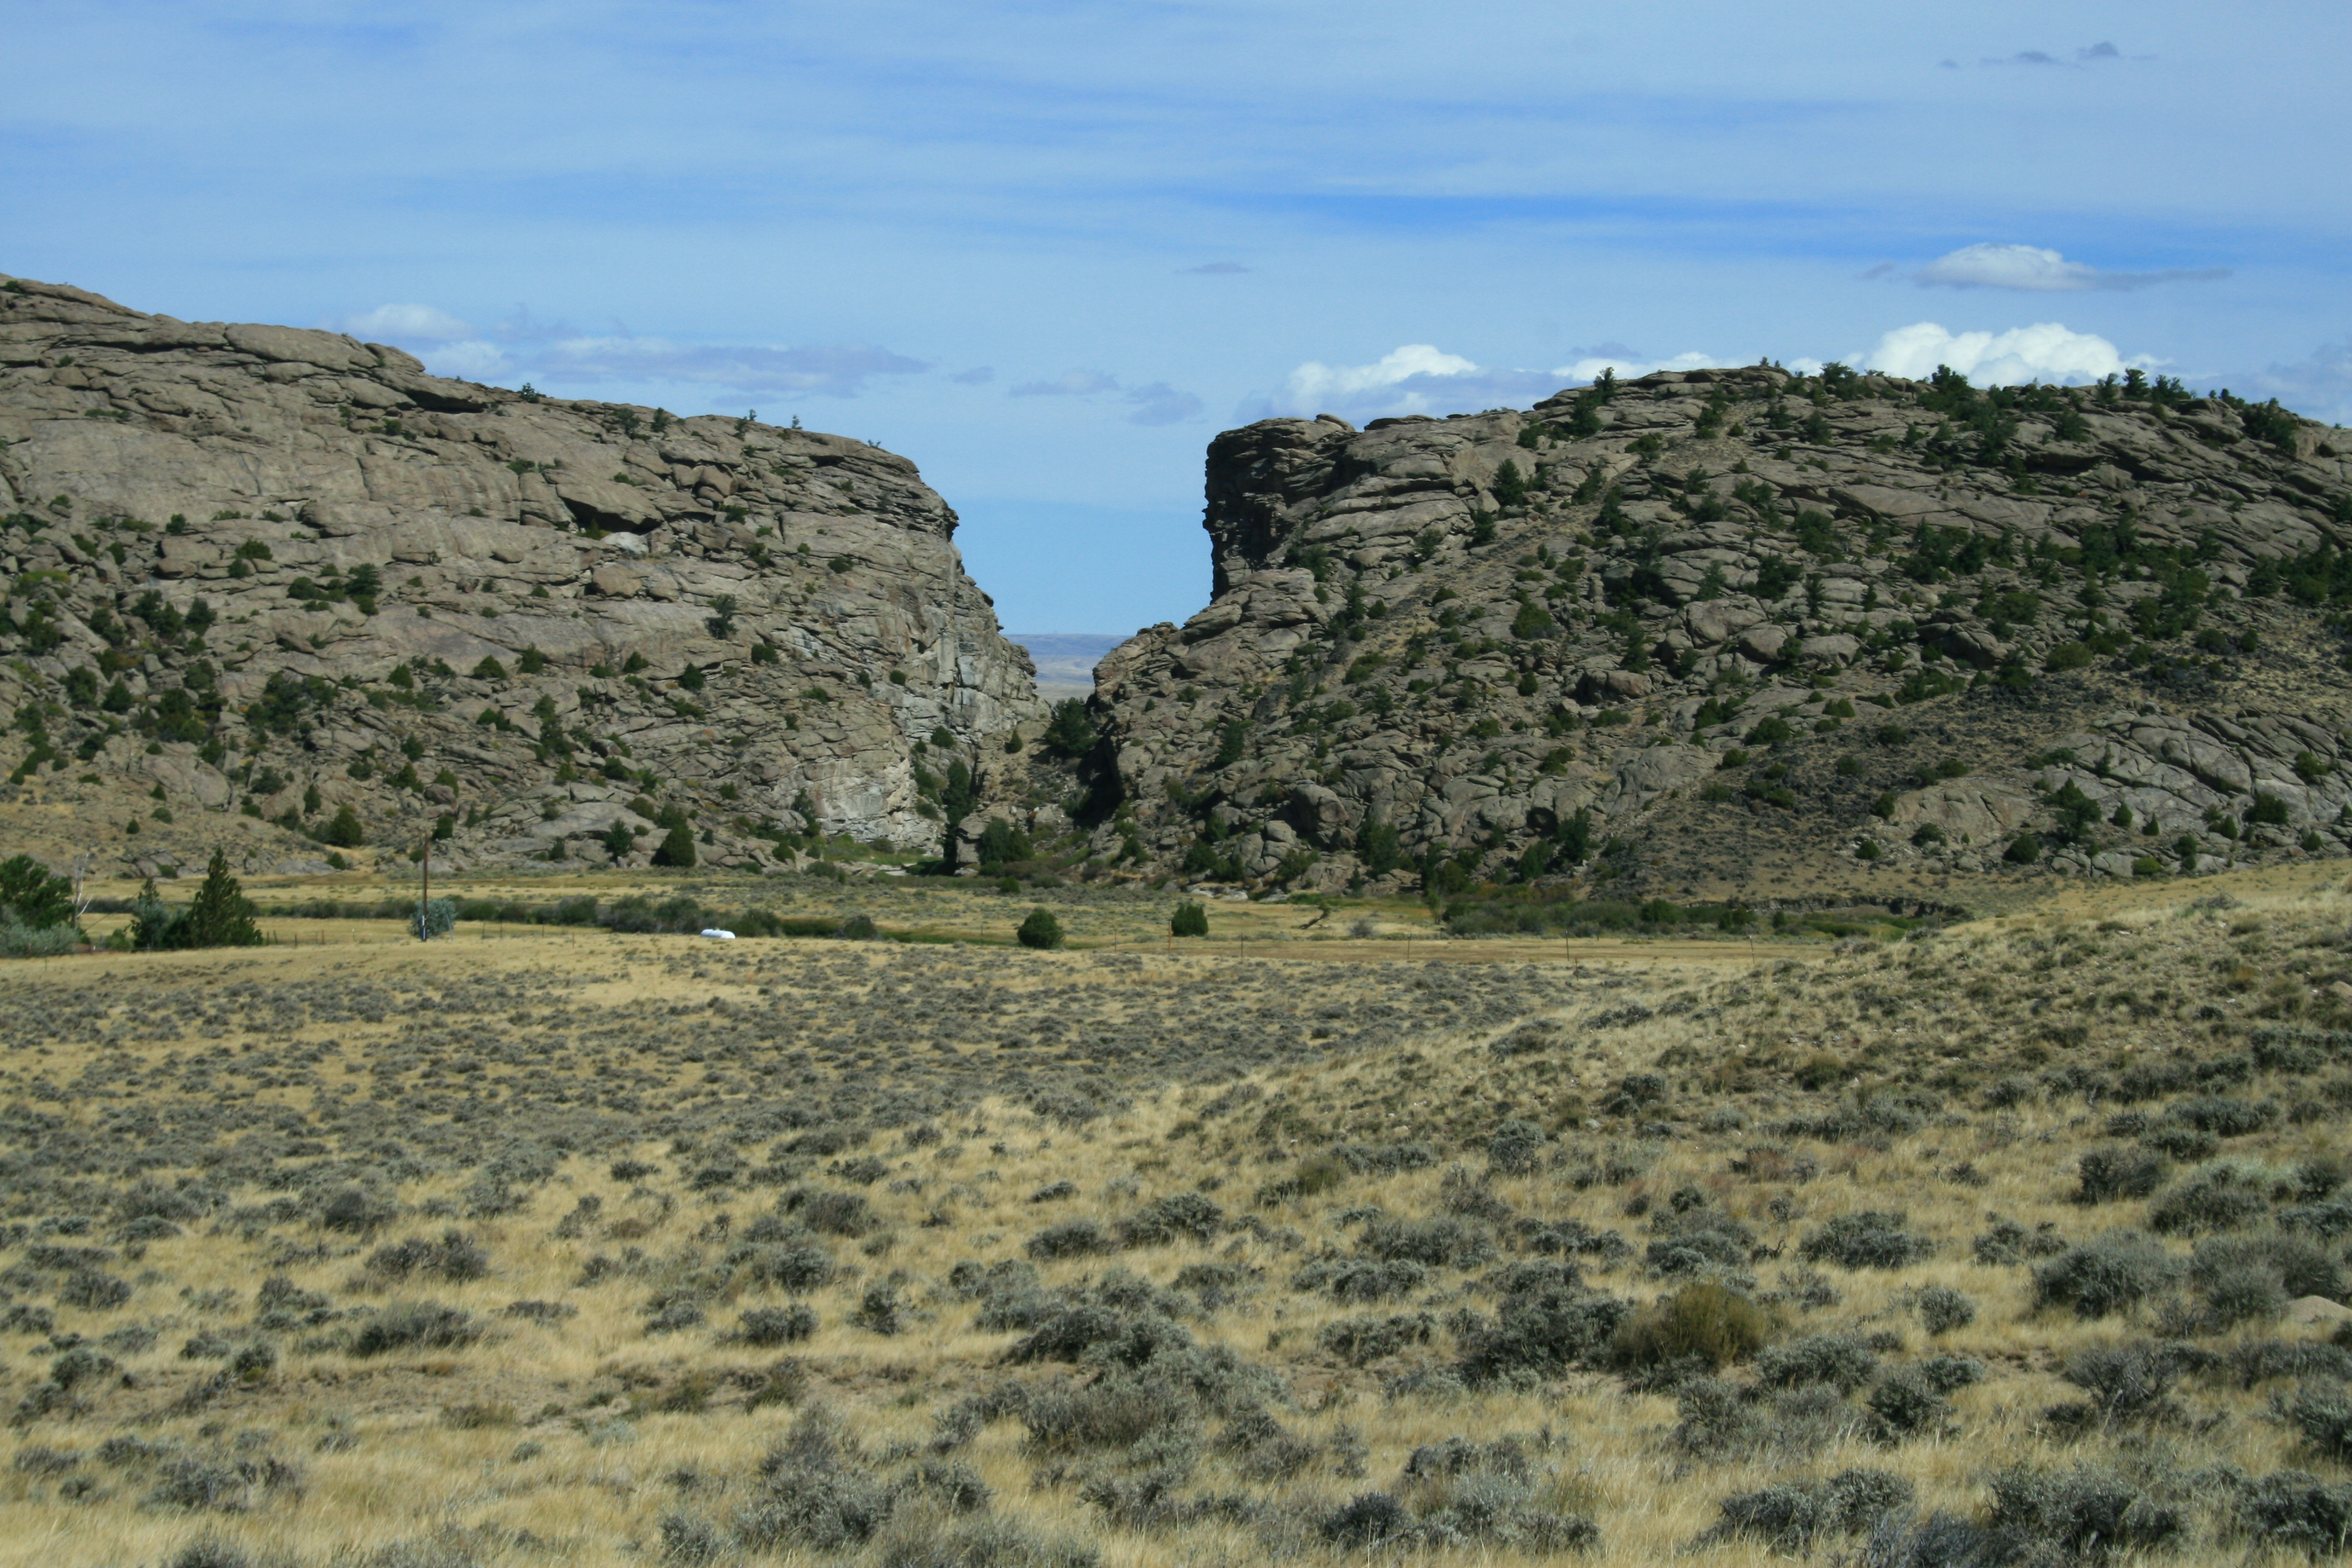 A rock buttress with a notch in it surrounded by sagebrush flats.